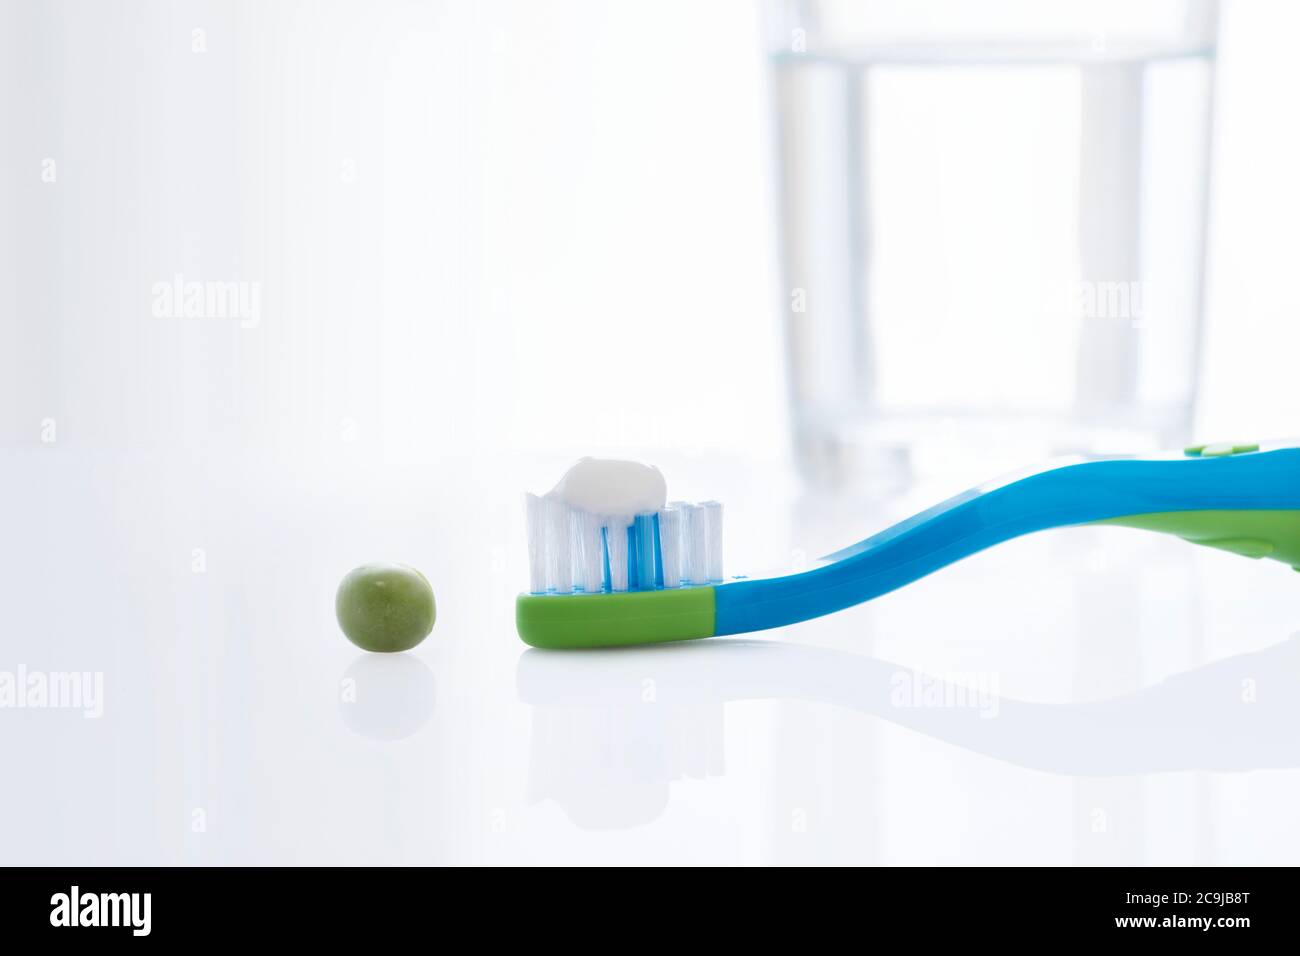 Toothbrush with a pea sized amount of toothpaste against a white background. Stock Photo